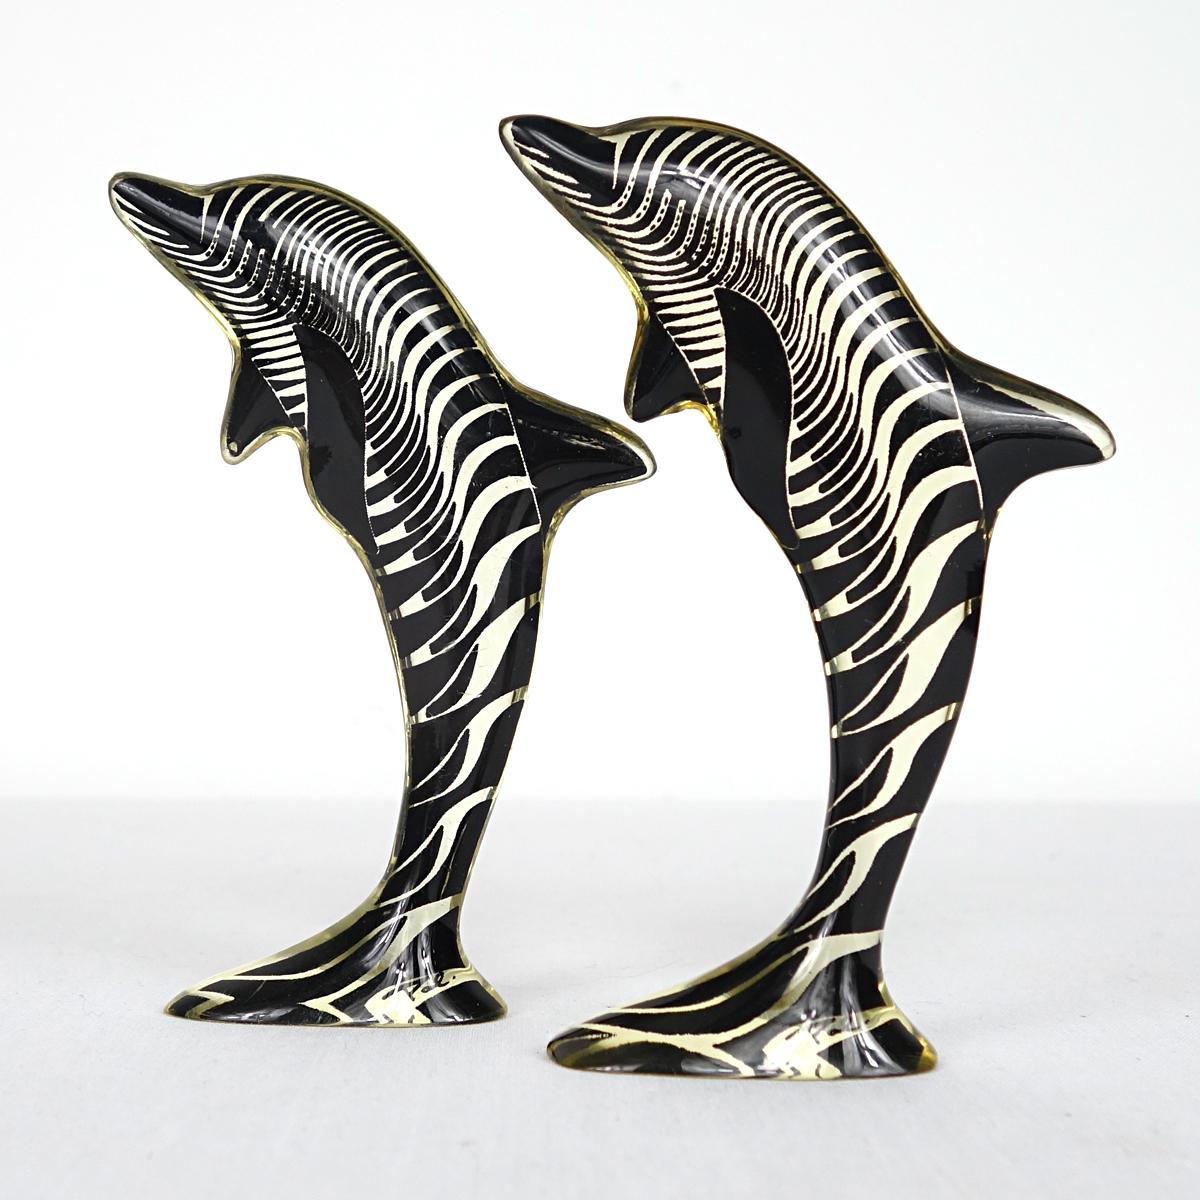 Pair of dolphins designed and made by Abraham Palatnik. 

The Brazilian artist Abraham Palatnik (1928) was the founder of the technological movement in Brazilian art, and a Pioneer in making Kinetic sculptures.
In the late 40th (1949) he created